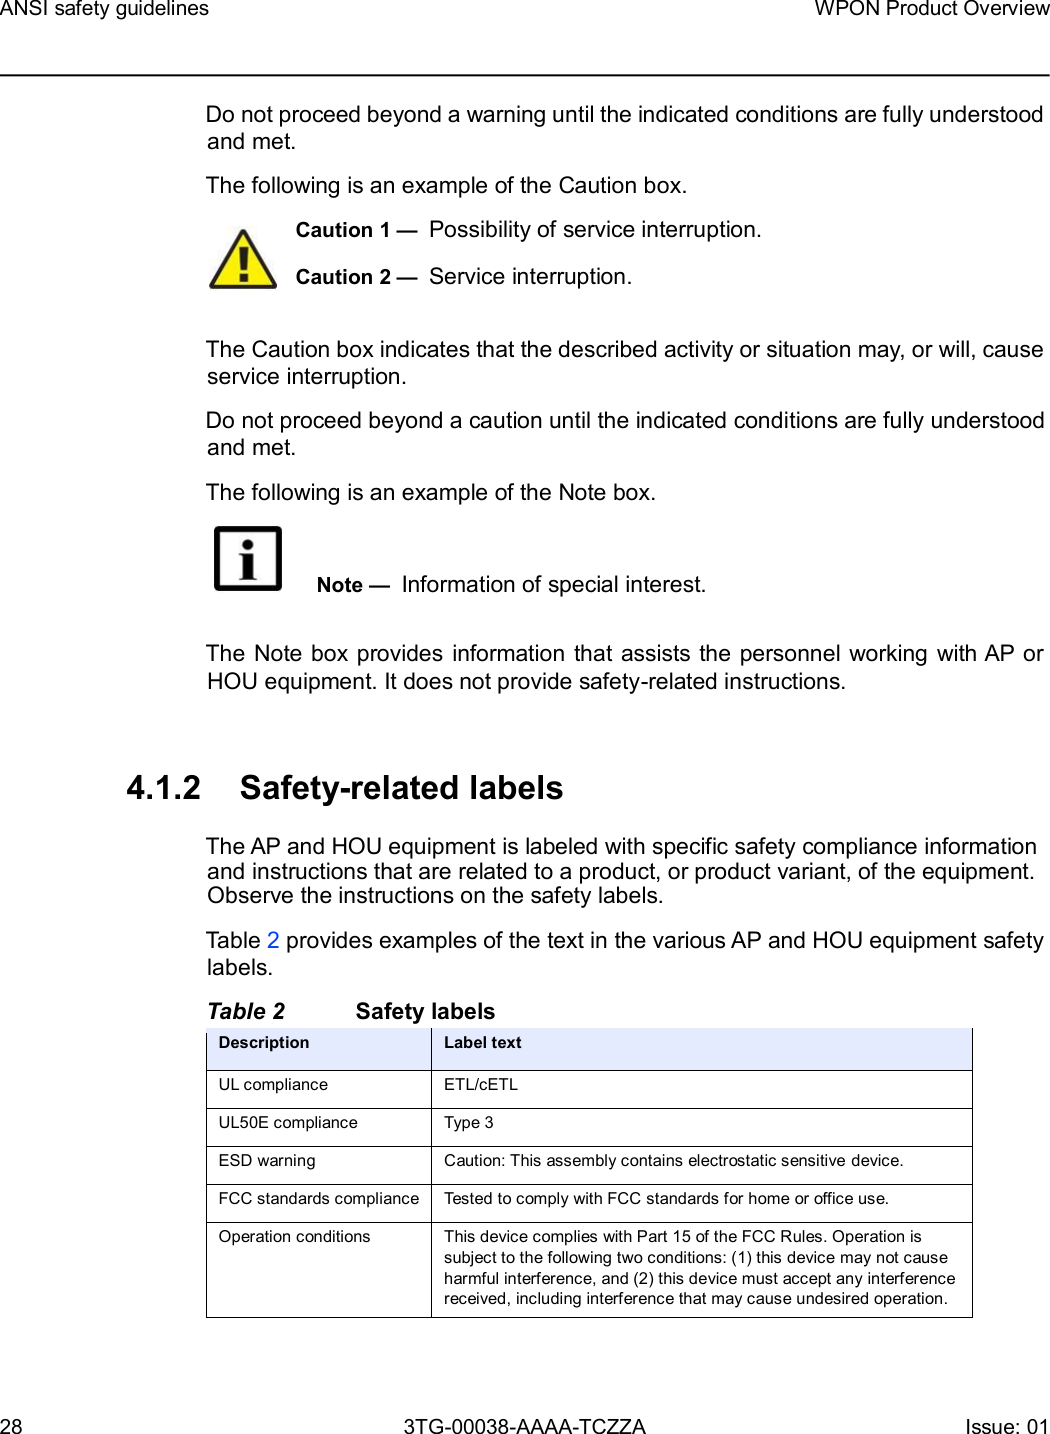 Page 28 of Nokia Bell 7577WPONAPED WPON User Manual WPON Product Overview